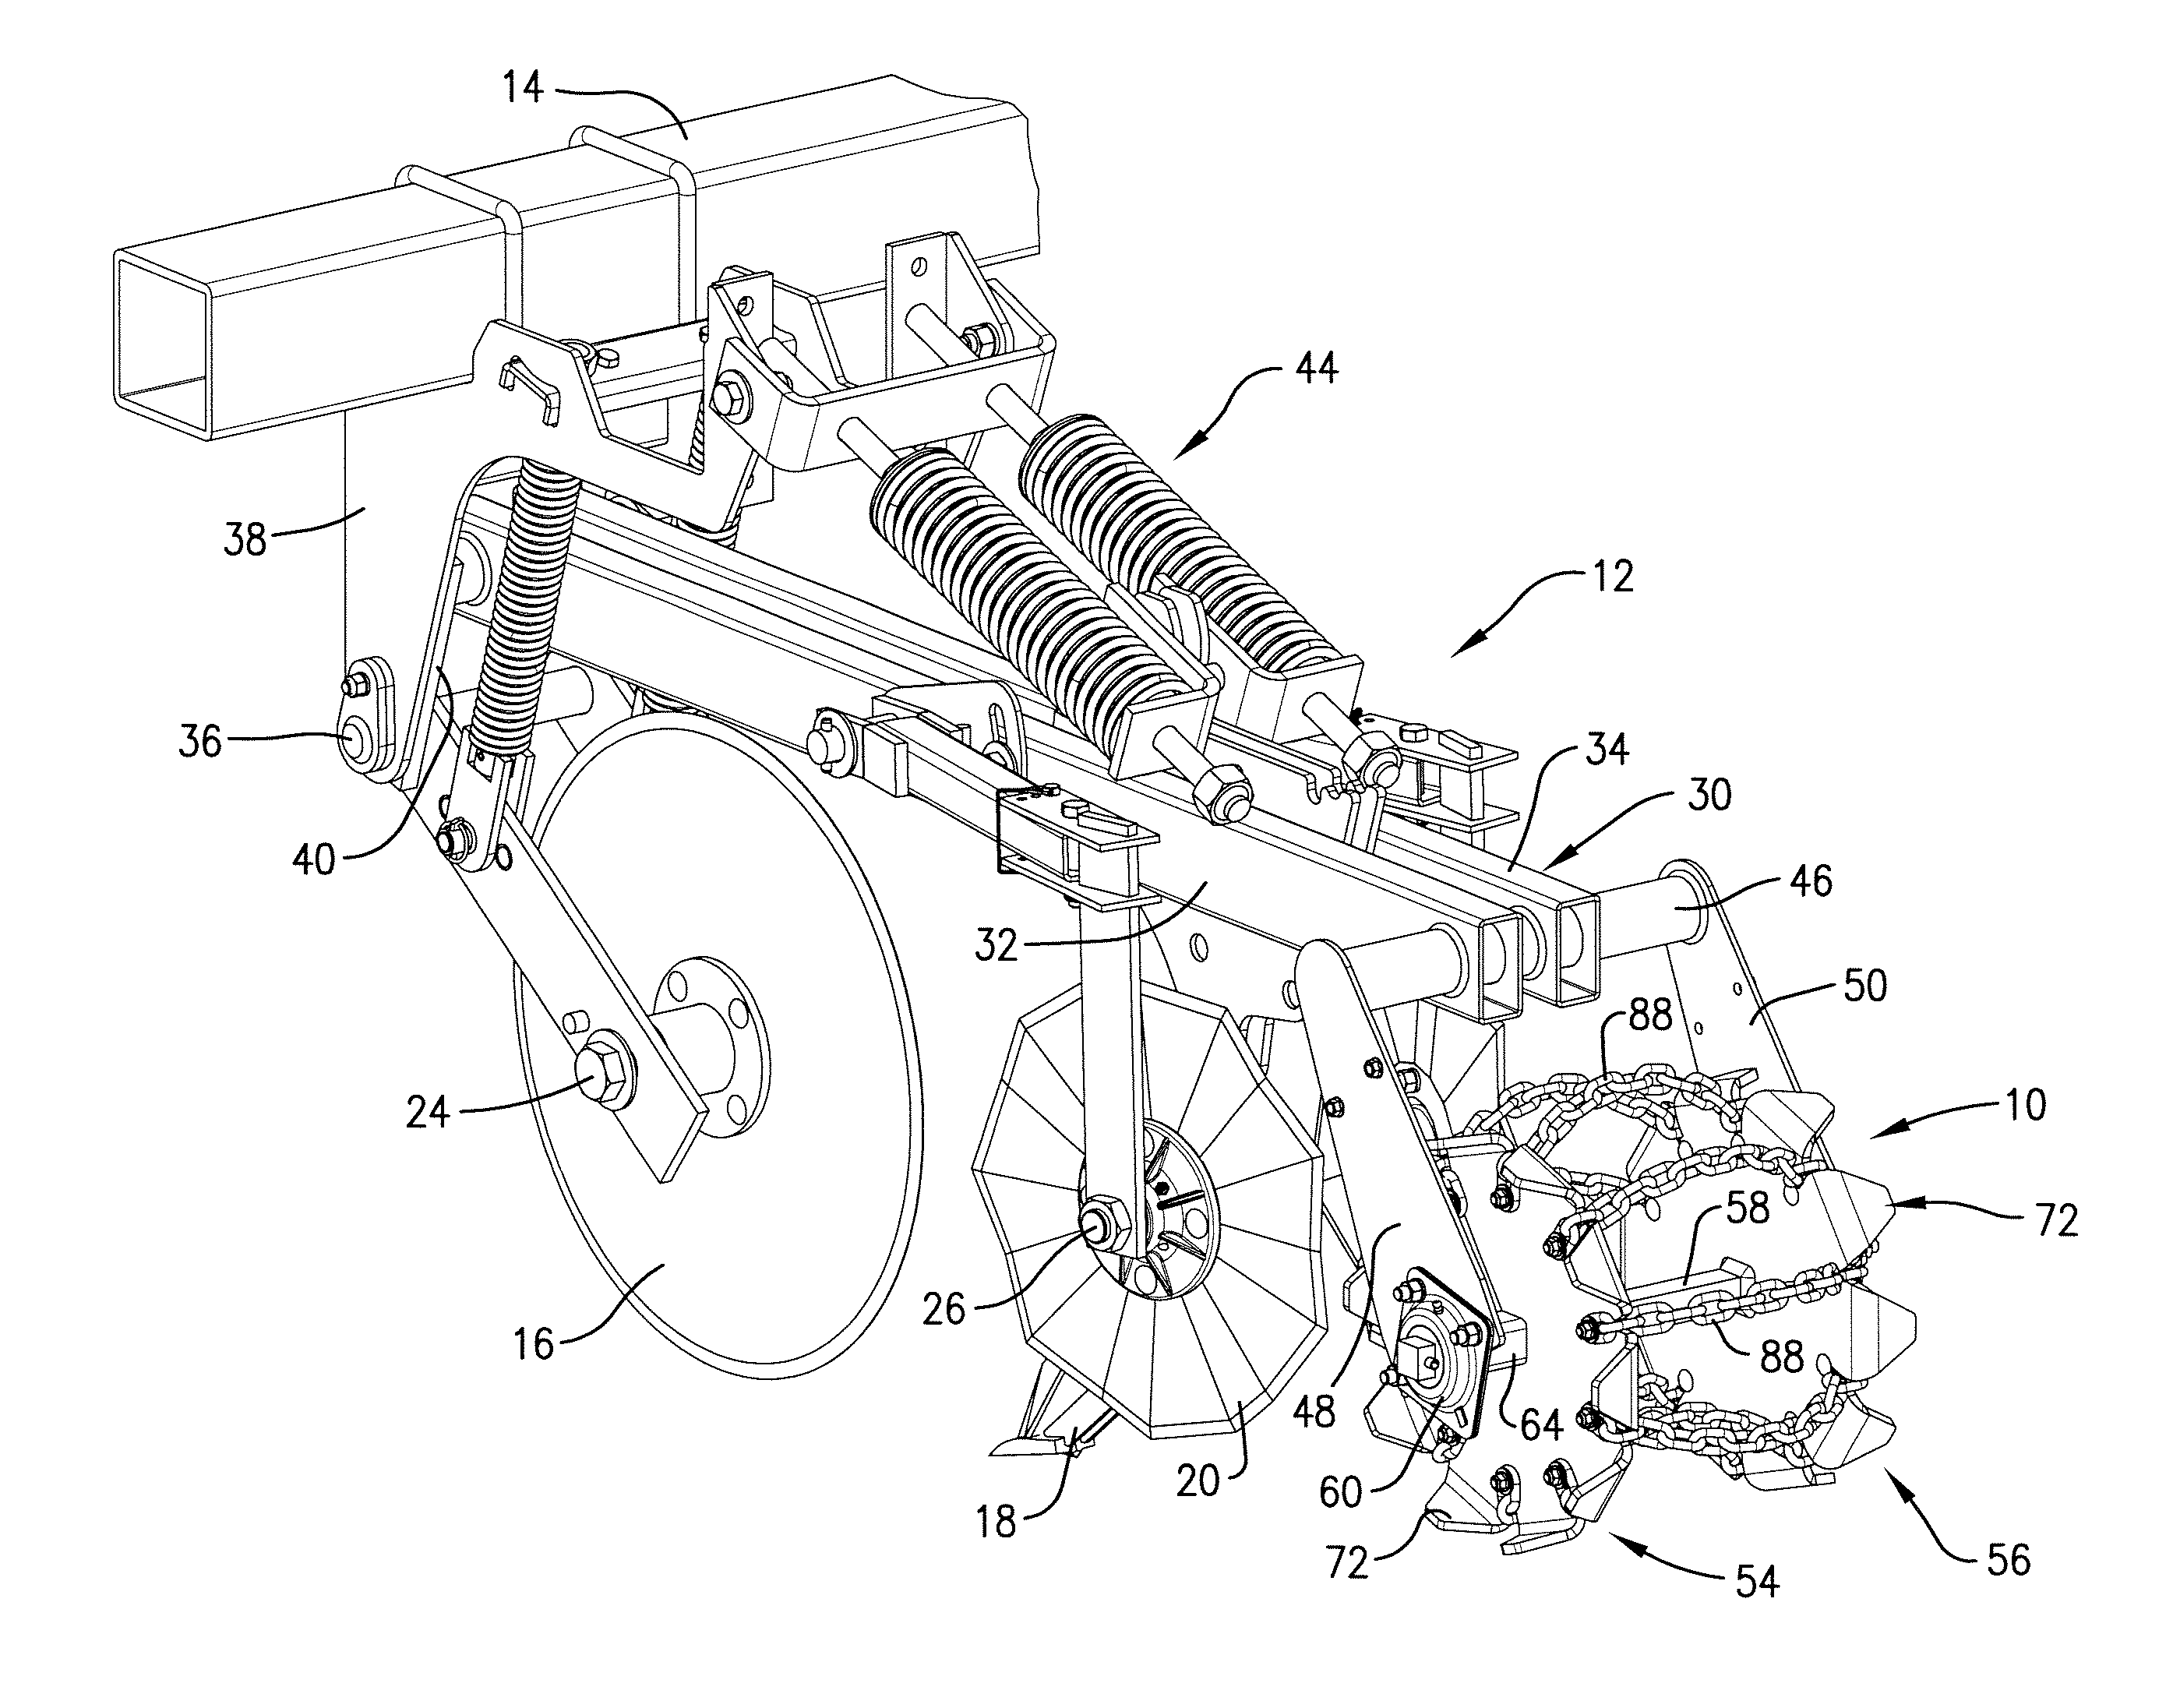 Chain reel for tillage implement